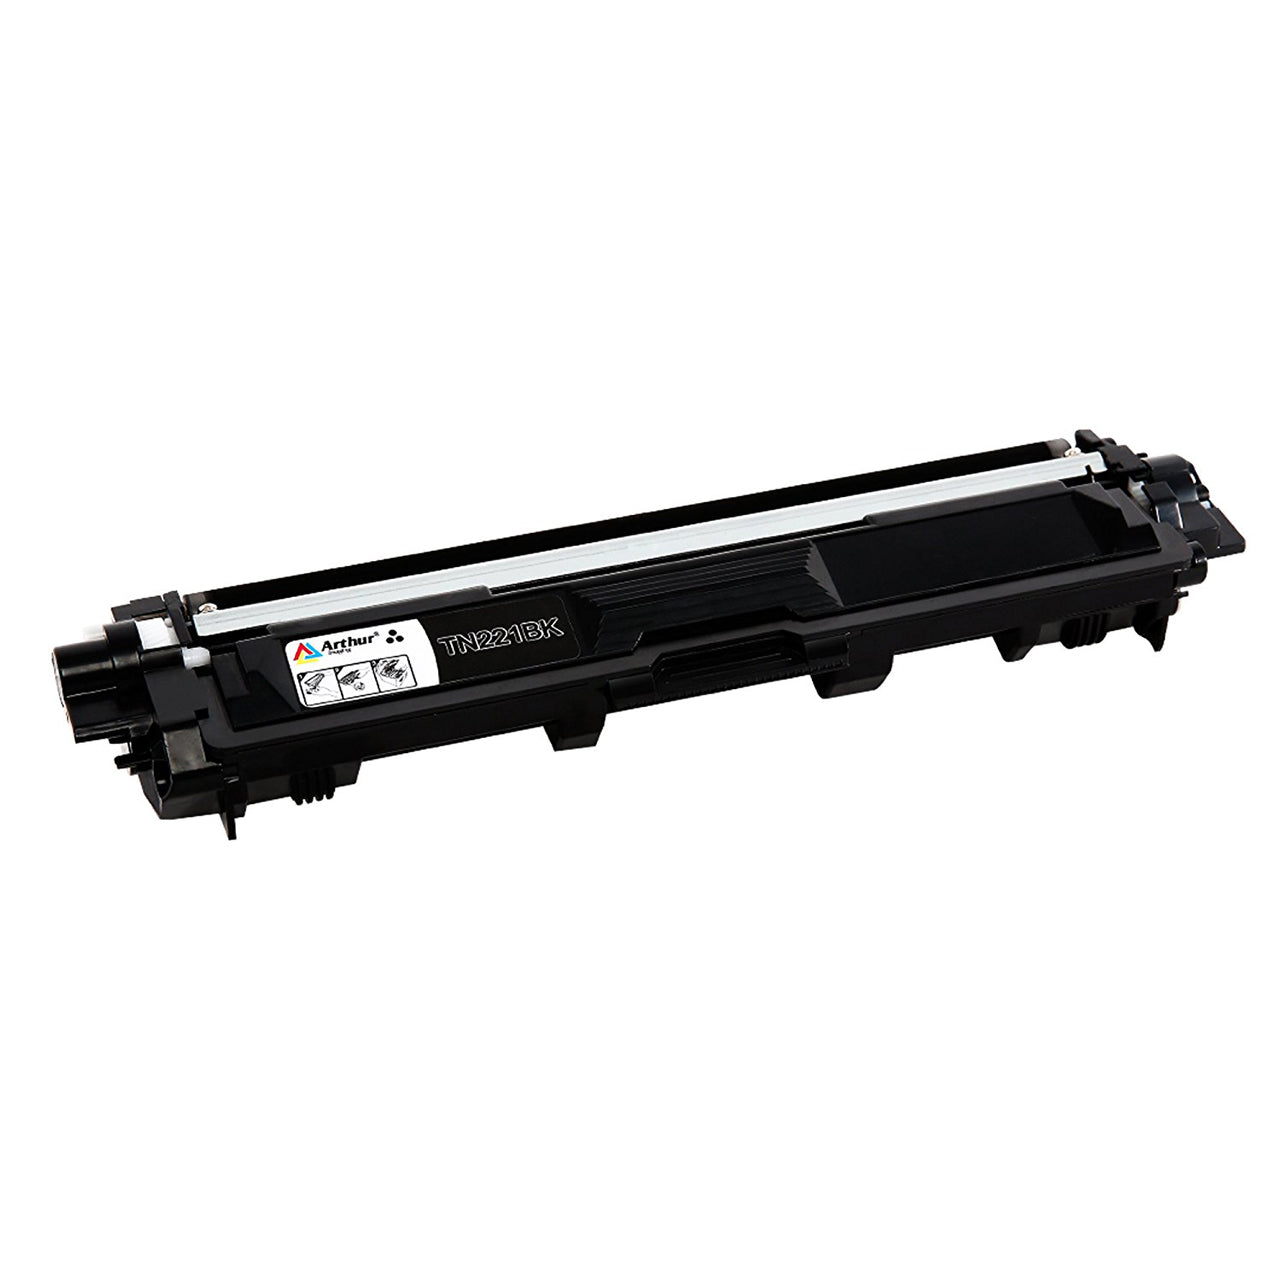 Arthur Imaging Compatible Toner Cartridge Replacement for Brother TN221 (Black, 1-Pack)